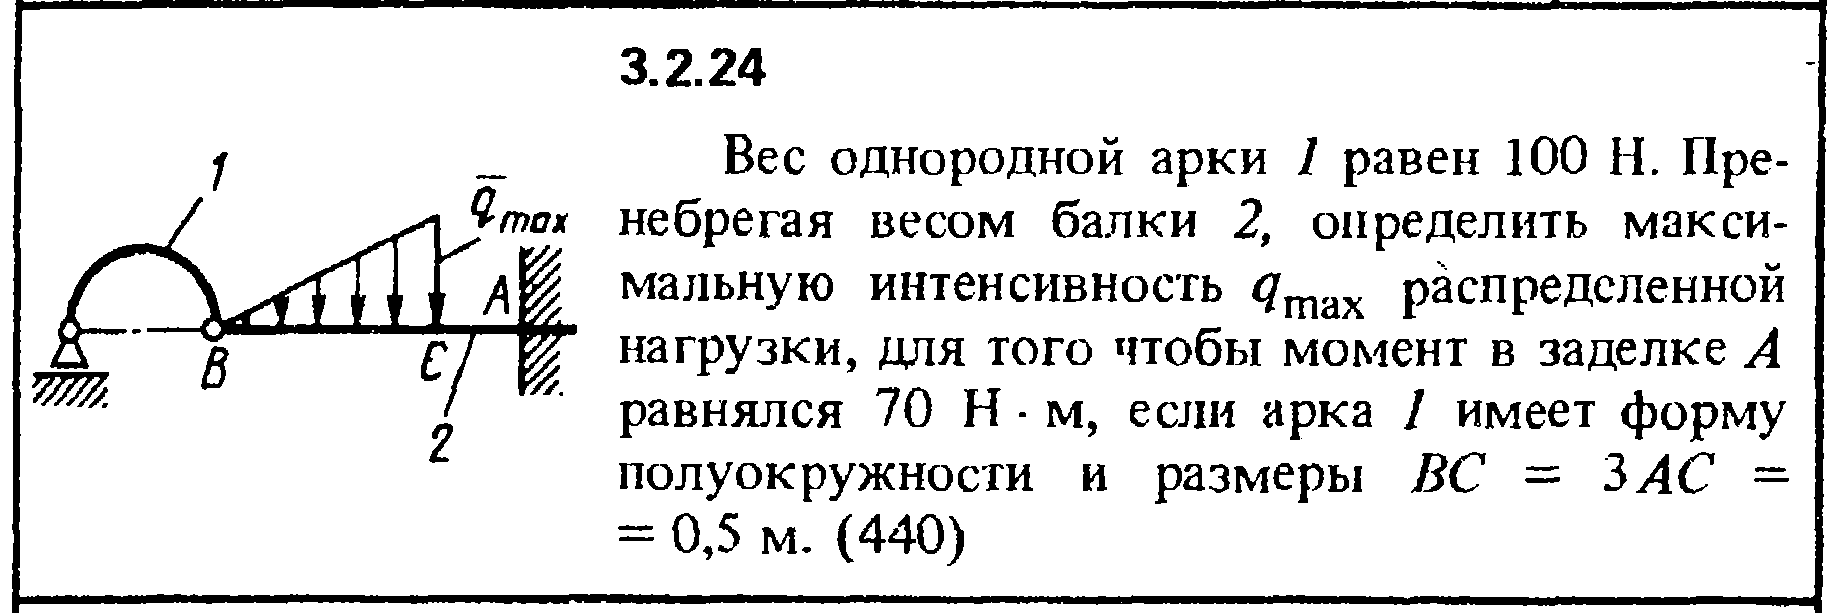 3.2.24 The solution of the problem of the collection of